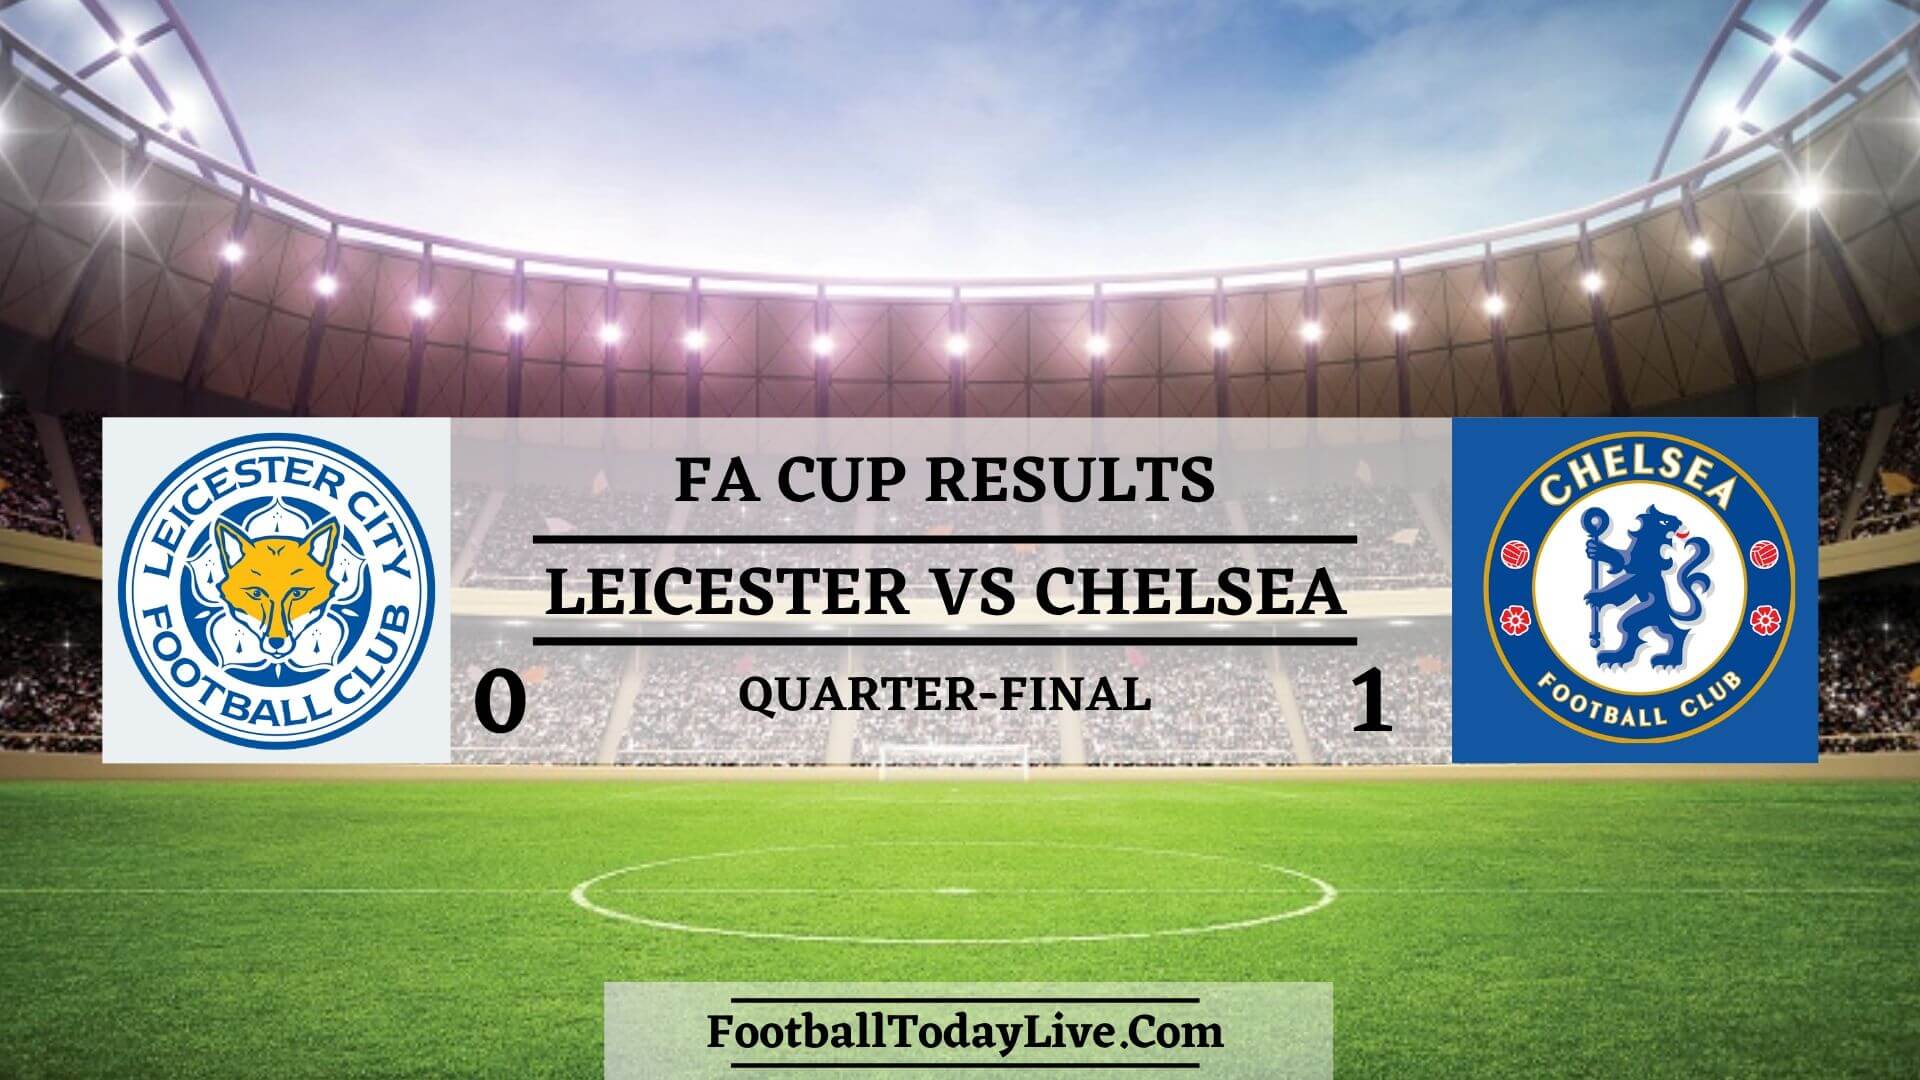 Leicester City Vs Chelsea | FA Cup Quarter-Final Result 2020